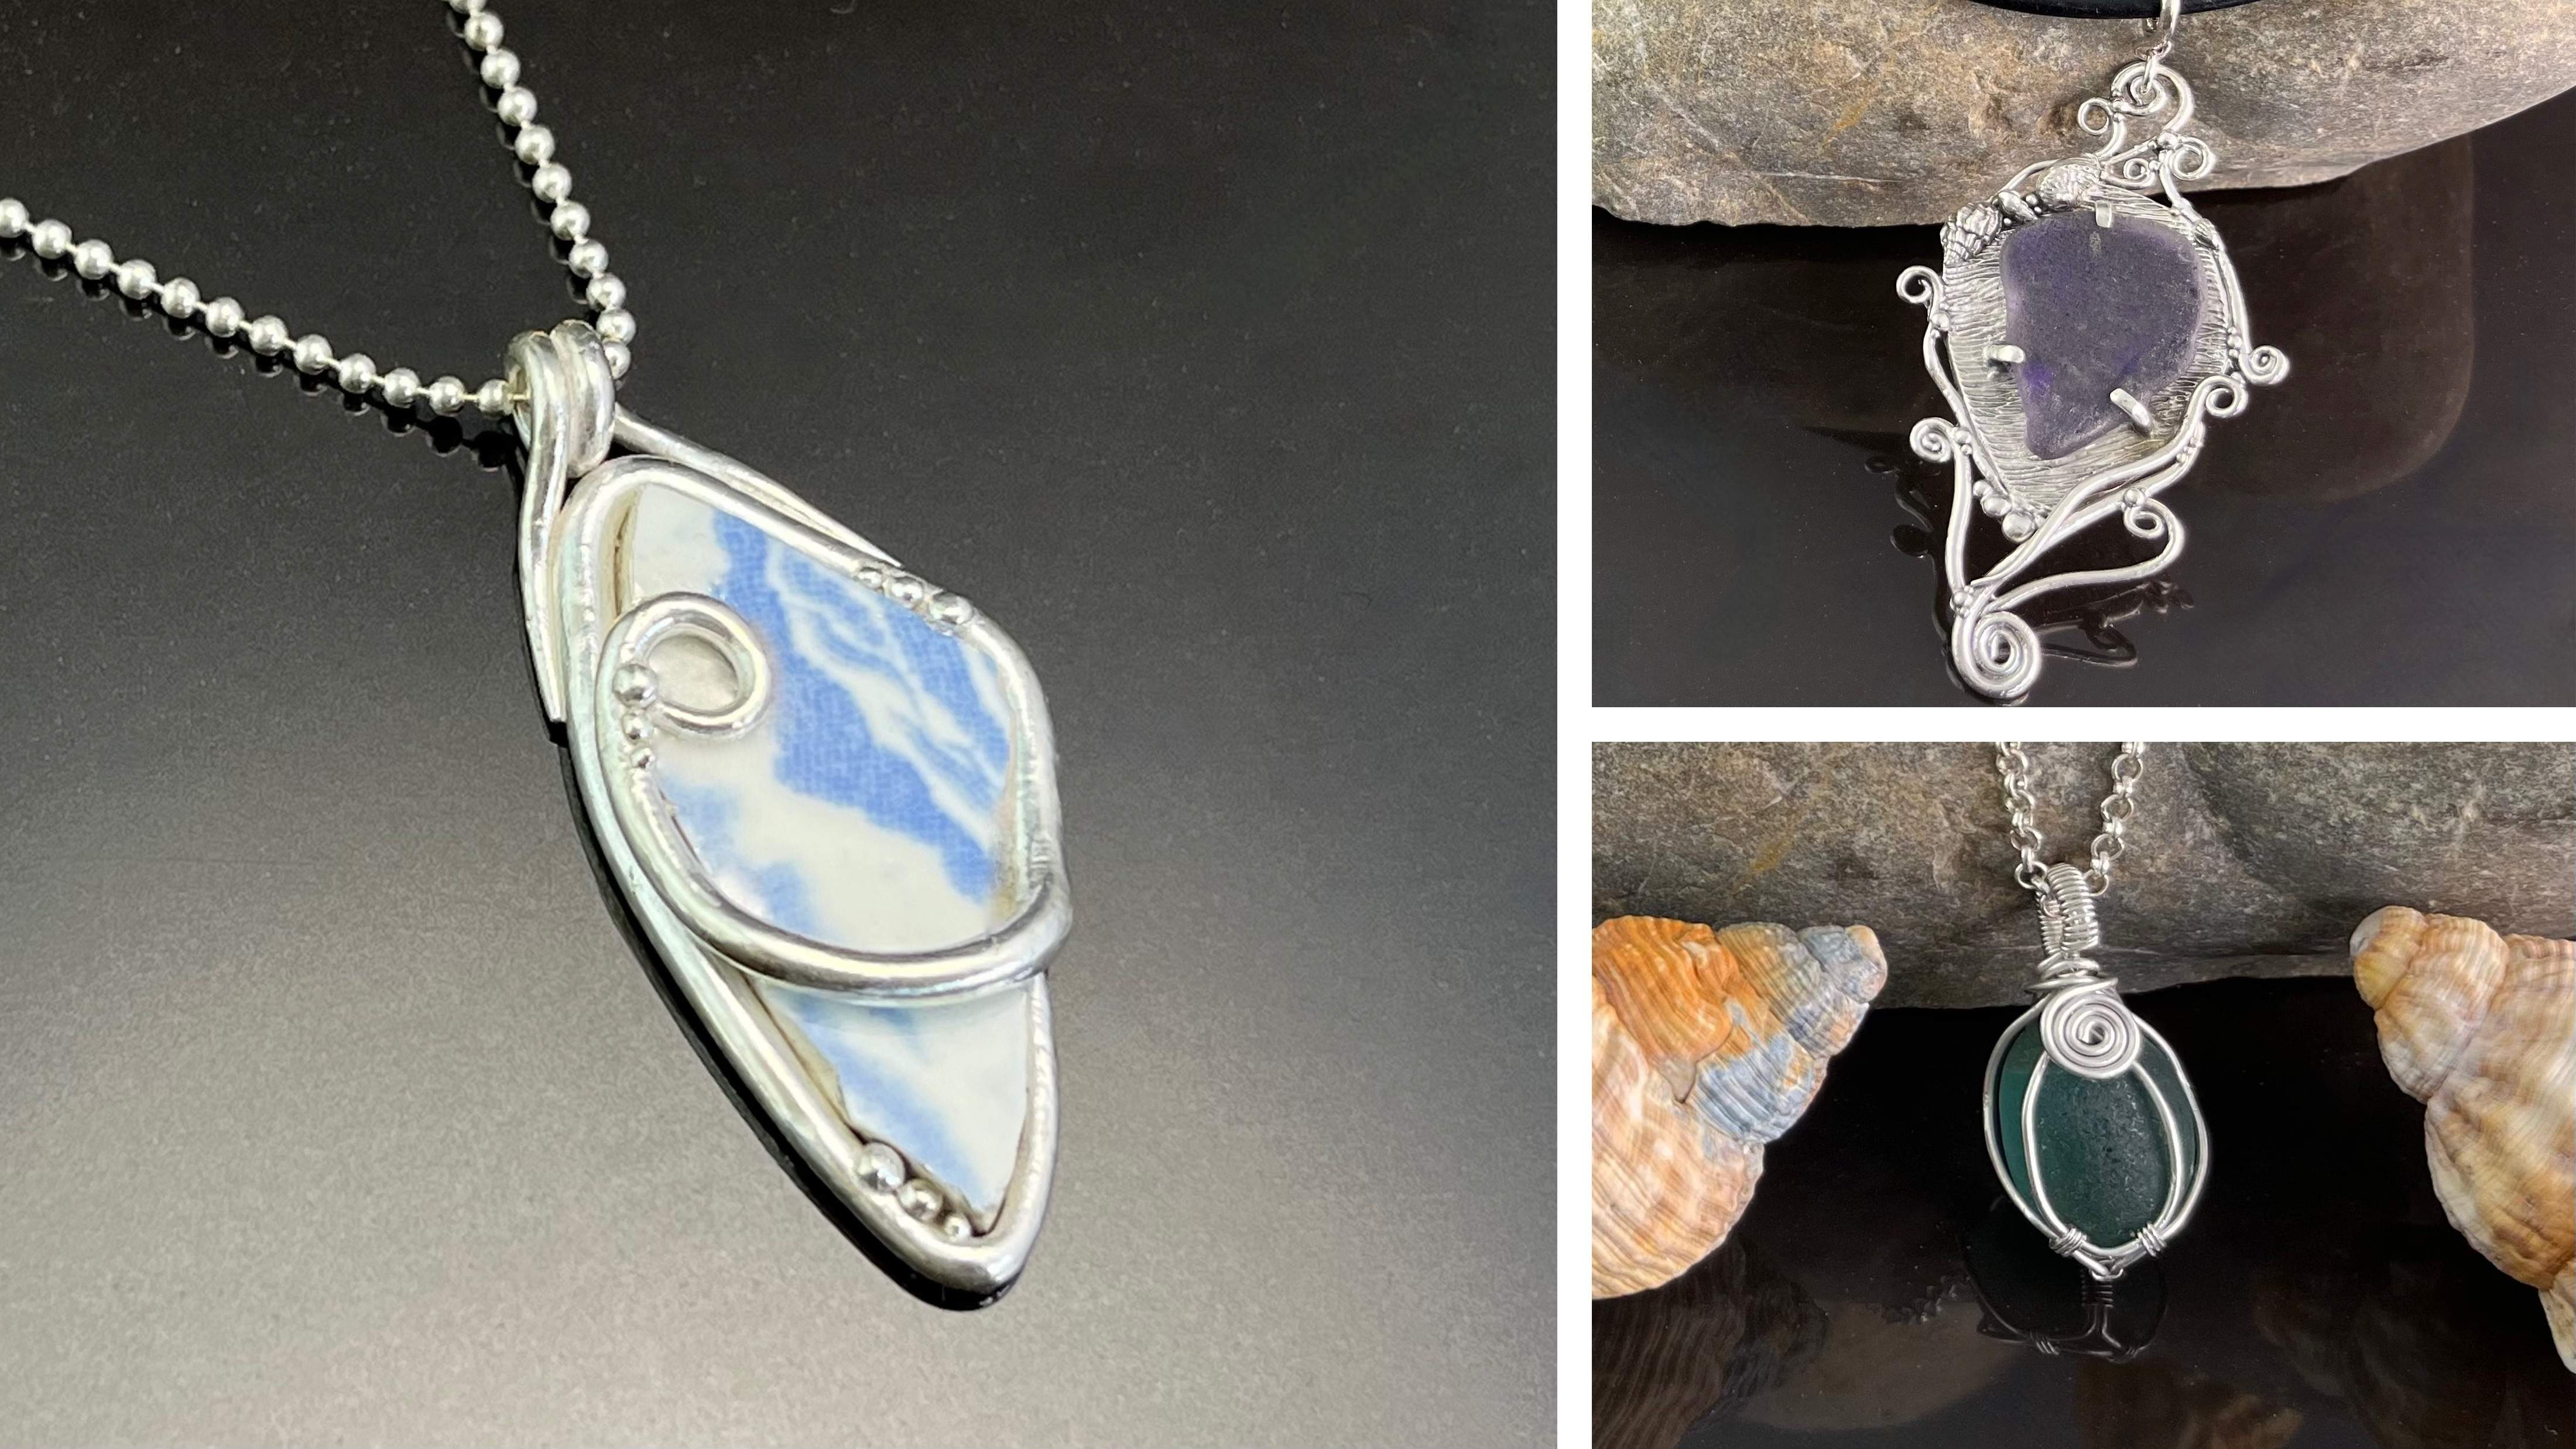 Craftcast Sea Glass and Metal Clay 2.0